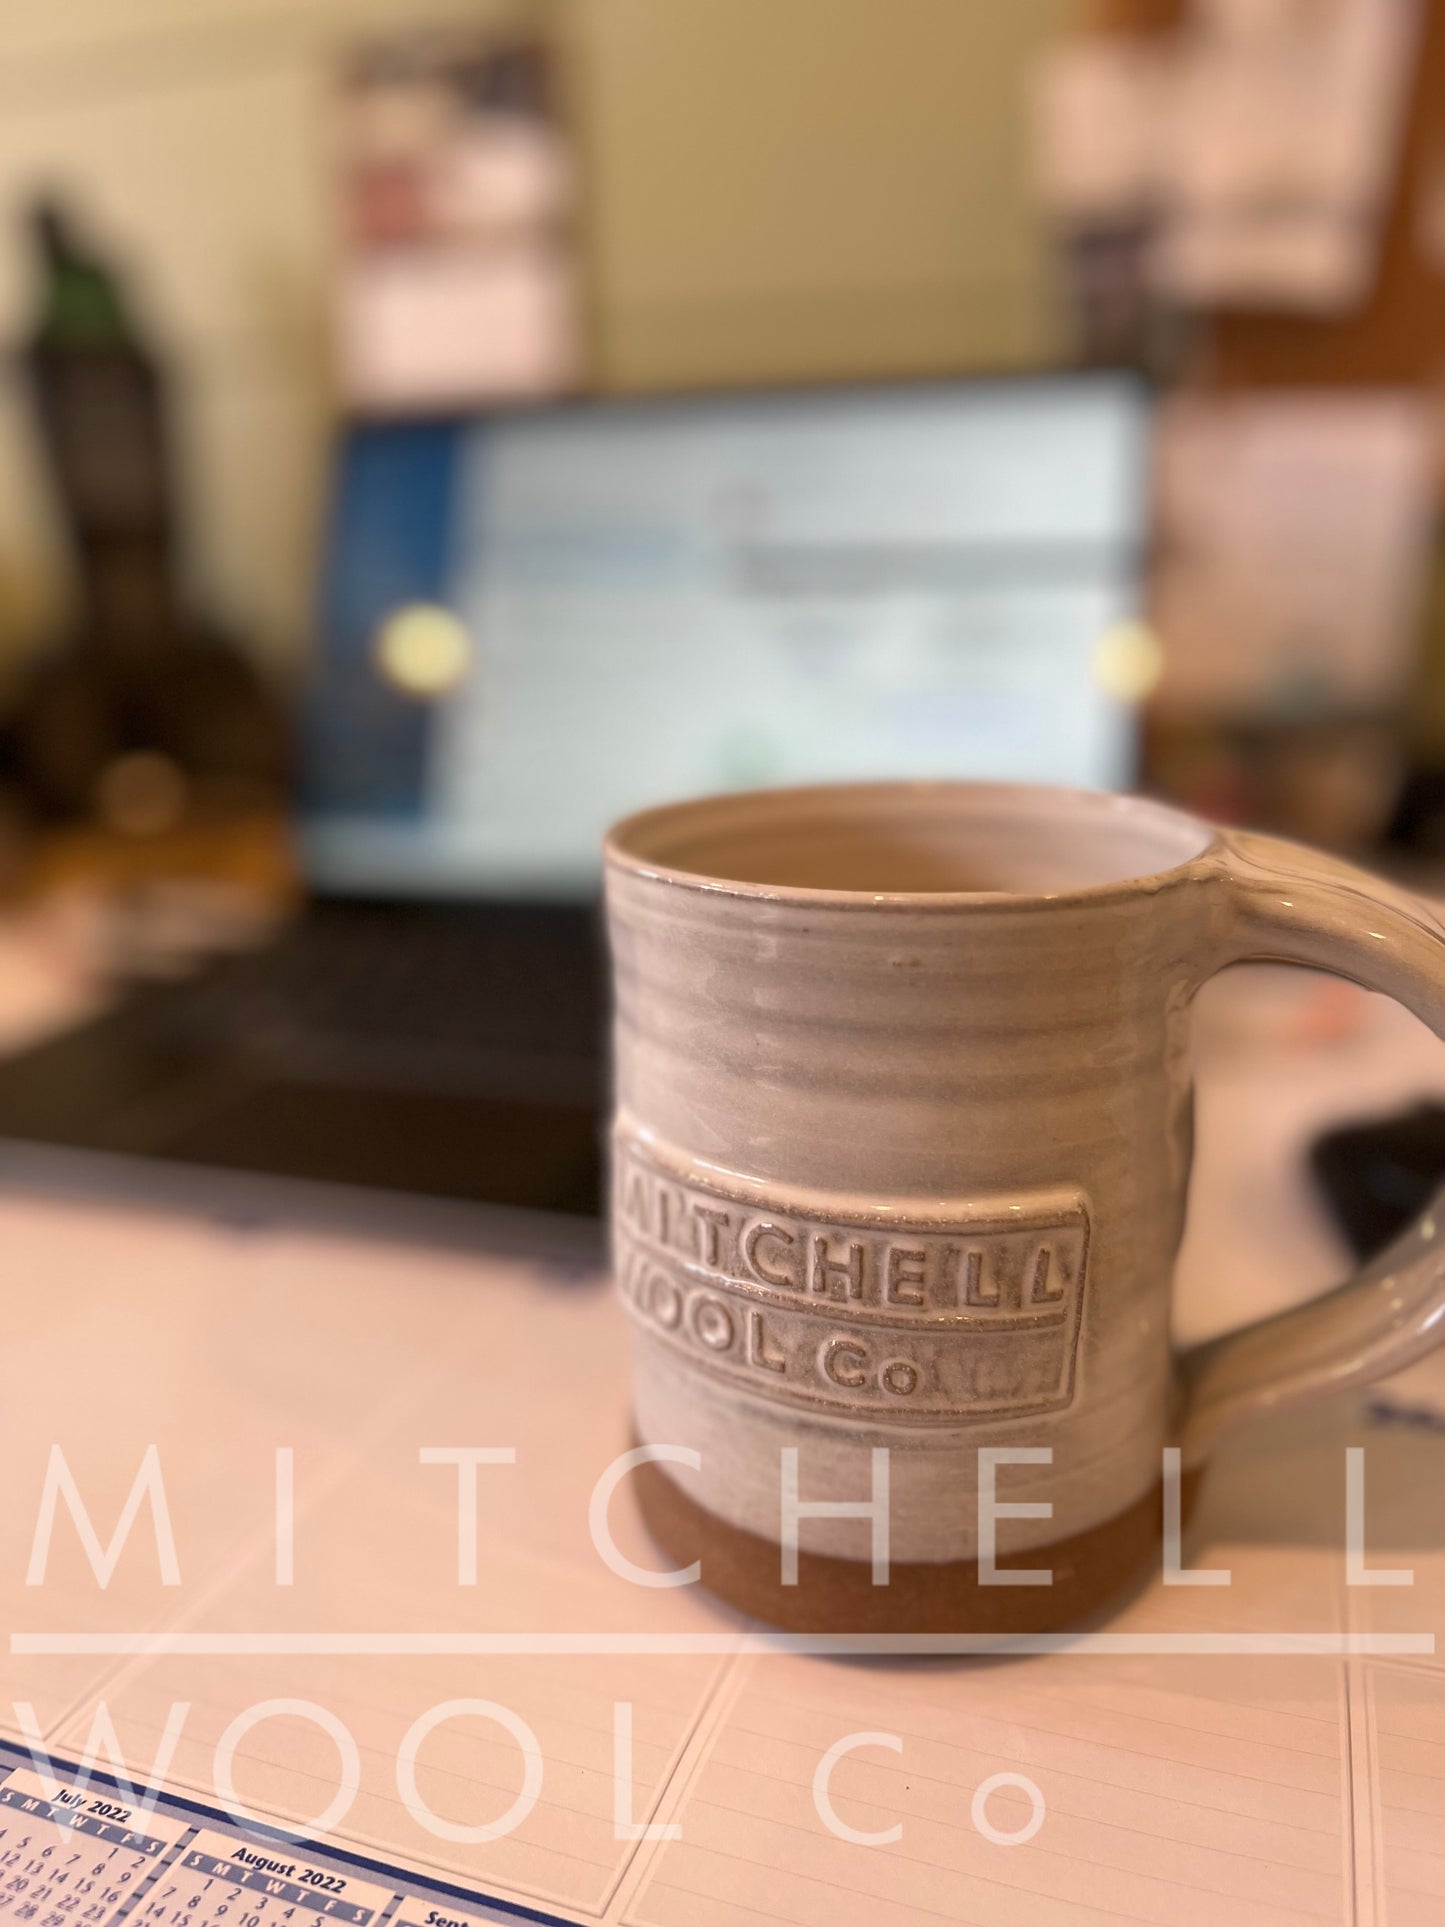 Sherry's own MWC mug sits in front of the work lap top distracting her from the day's tasks at hand because of it's stunning beauty. The glaze beautifully highlights the soft rings around the body and compliments the raw pottery bottom. The inside is fully glazed.